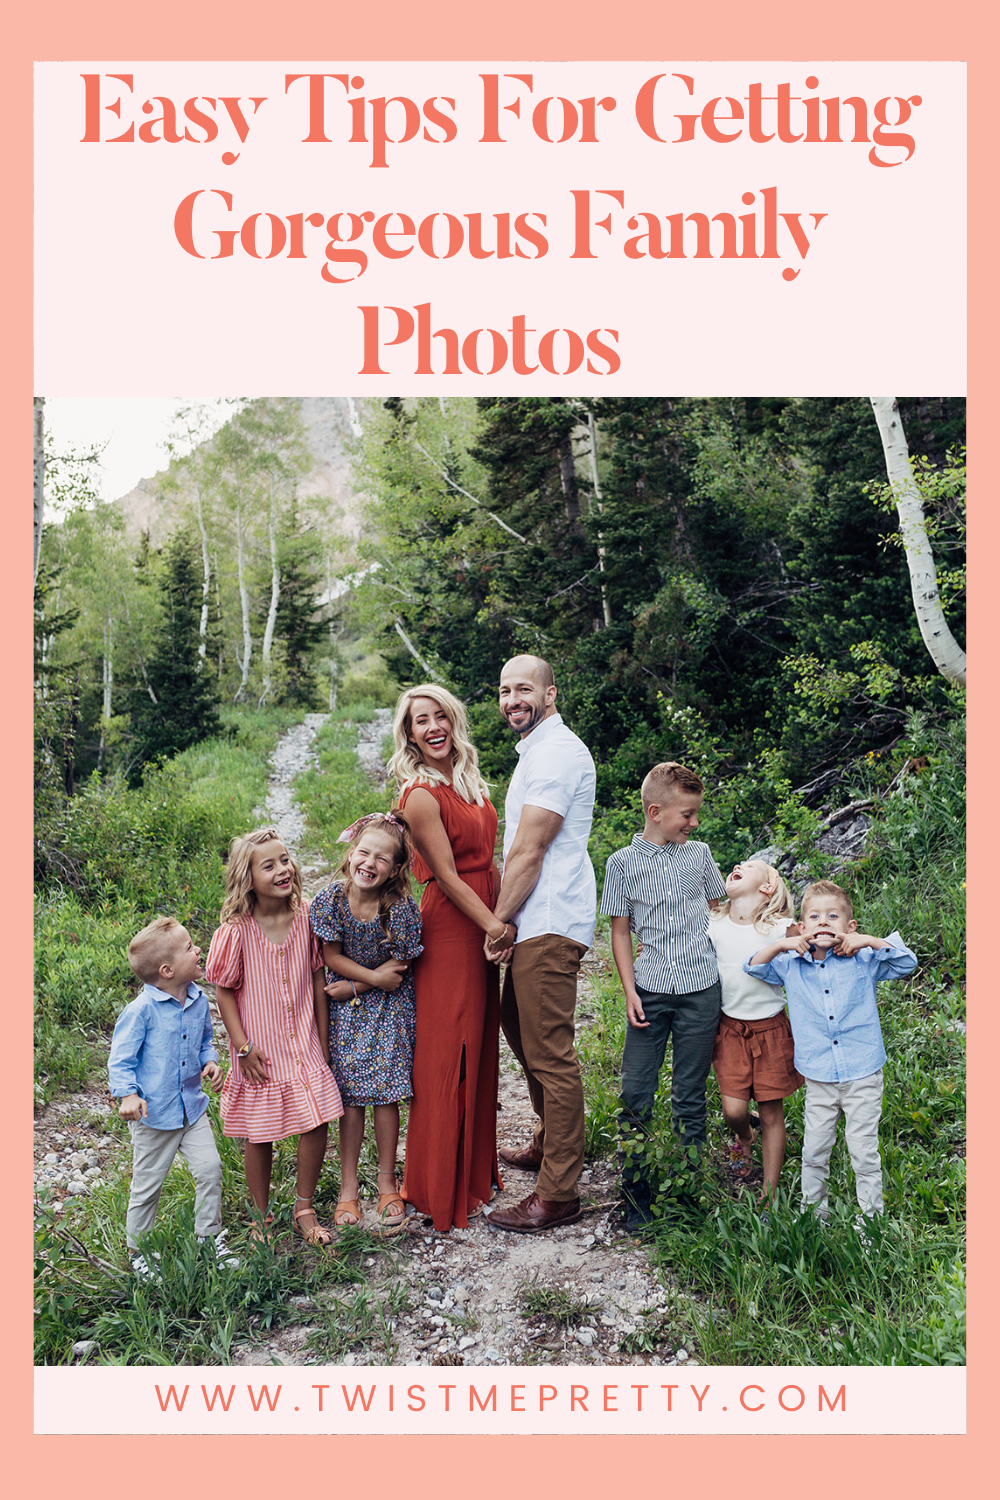 3 Tips for a Family Photo Shoot with Kids - Twist Me Pretty